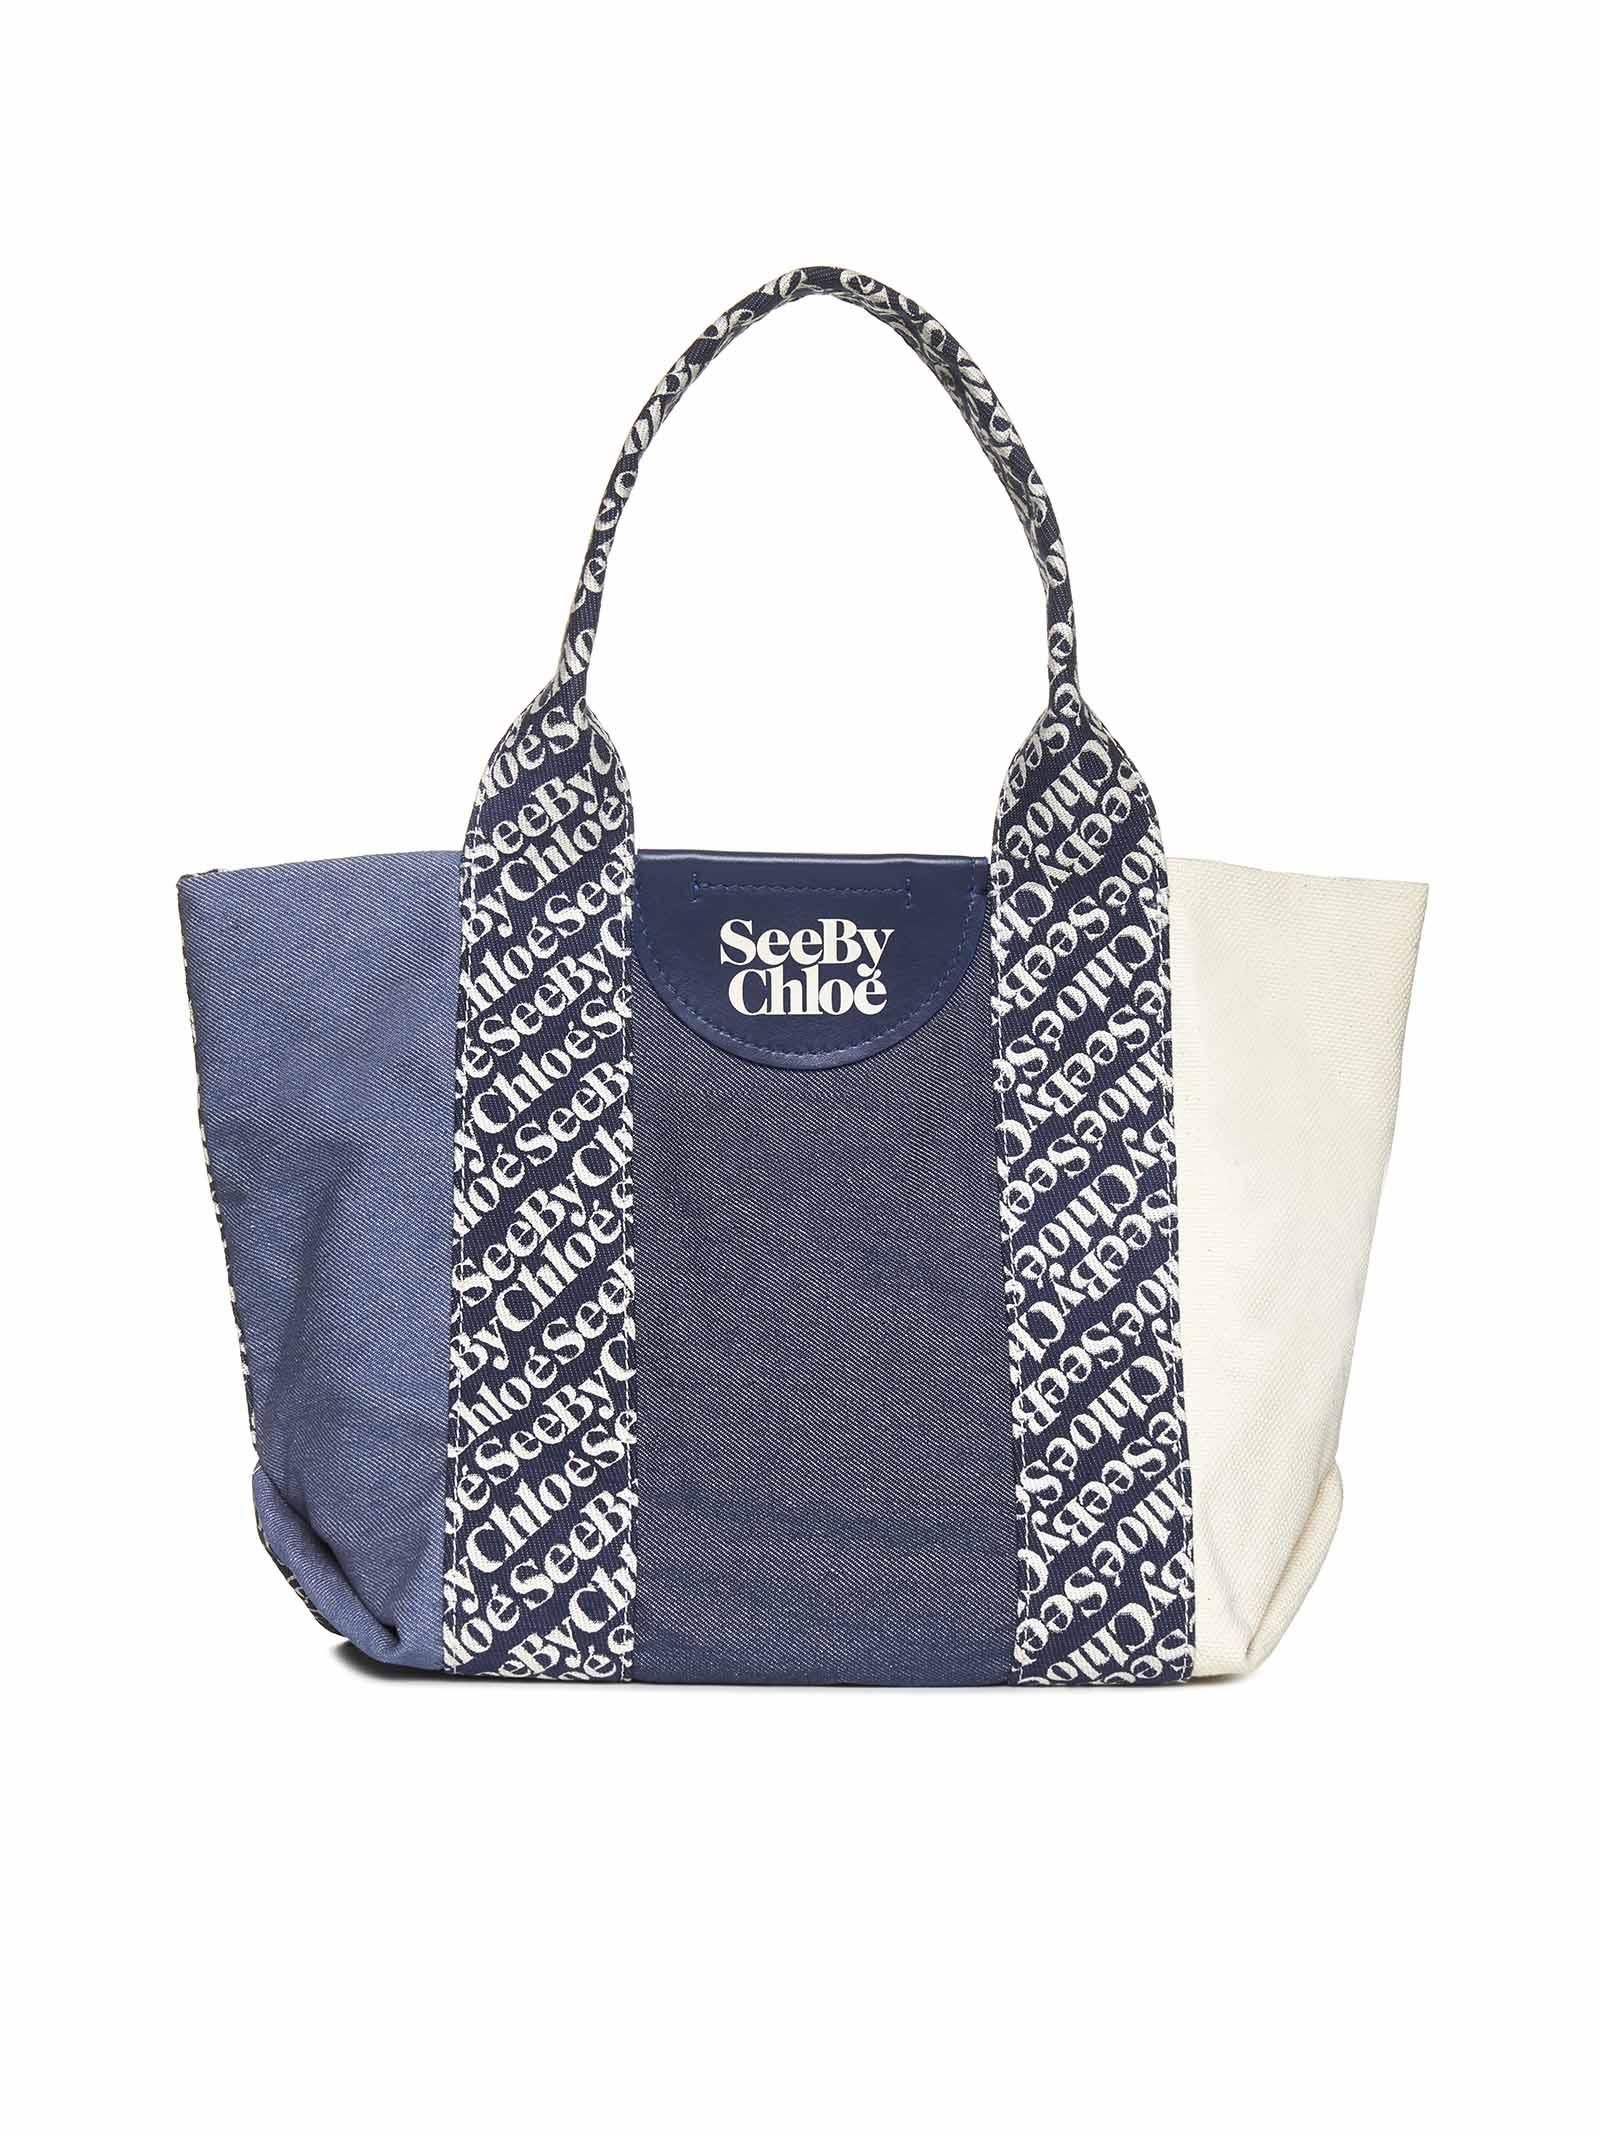 See By Chloé Letizia Denim Small Tote Bag in Blue | Lyst